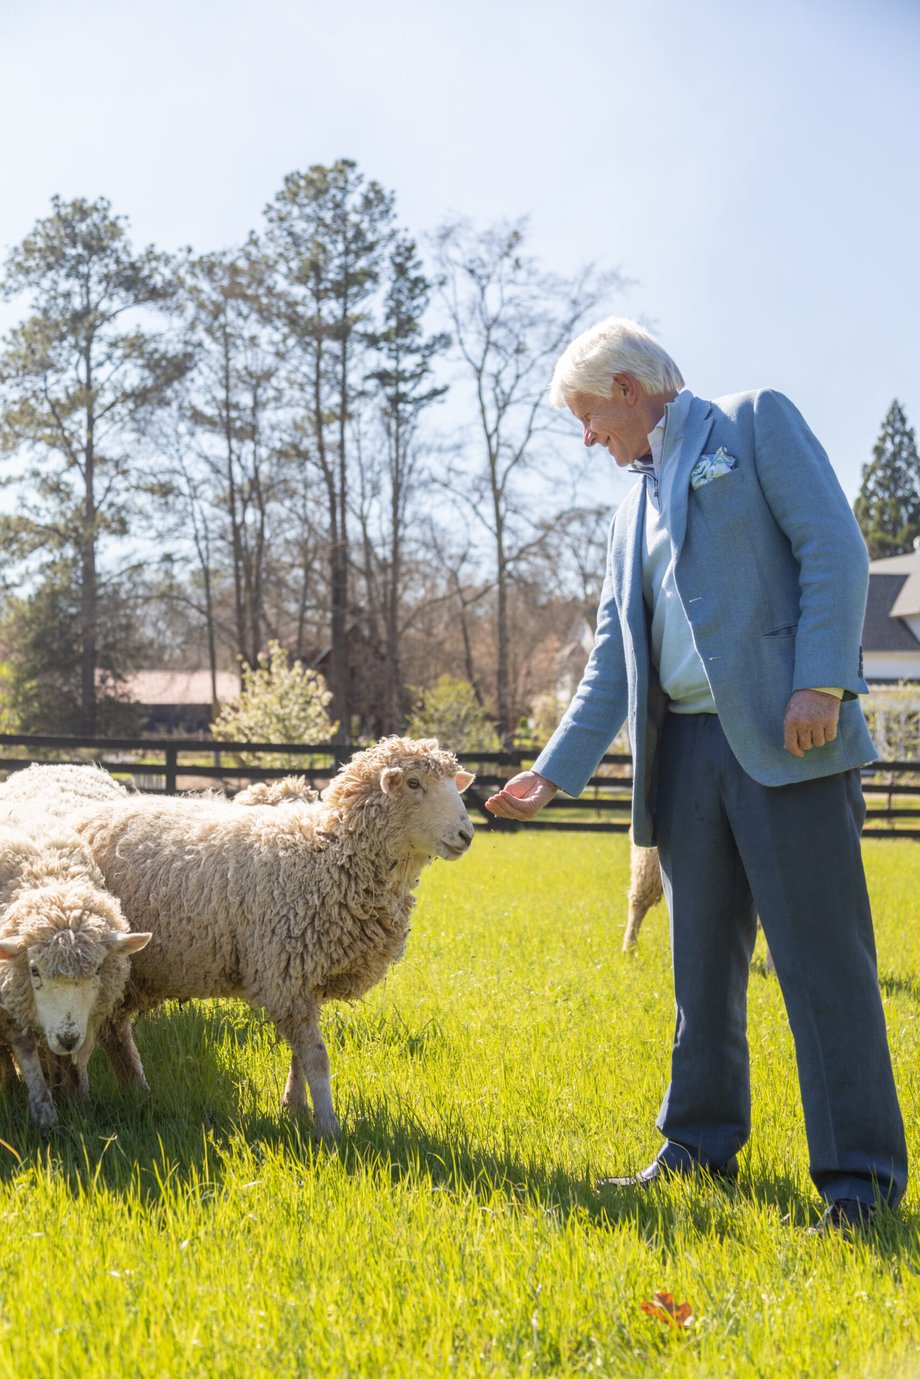 Patrick Heagney snaps a photo of Steve Nygren, founder of Serenbe, holds a hand out to his sheep